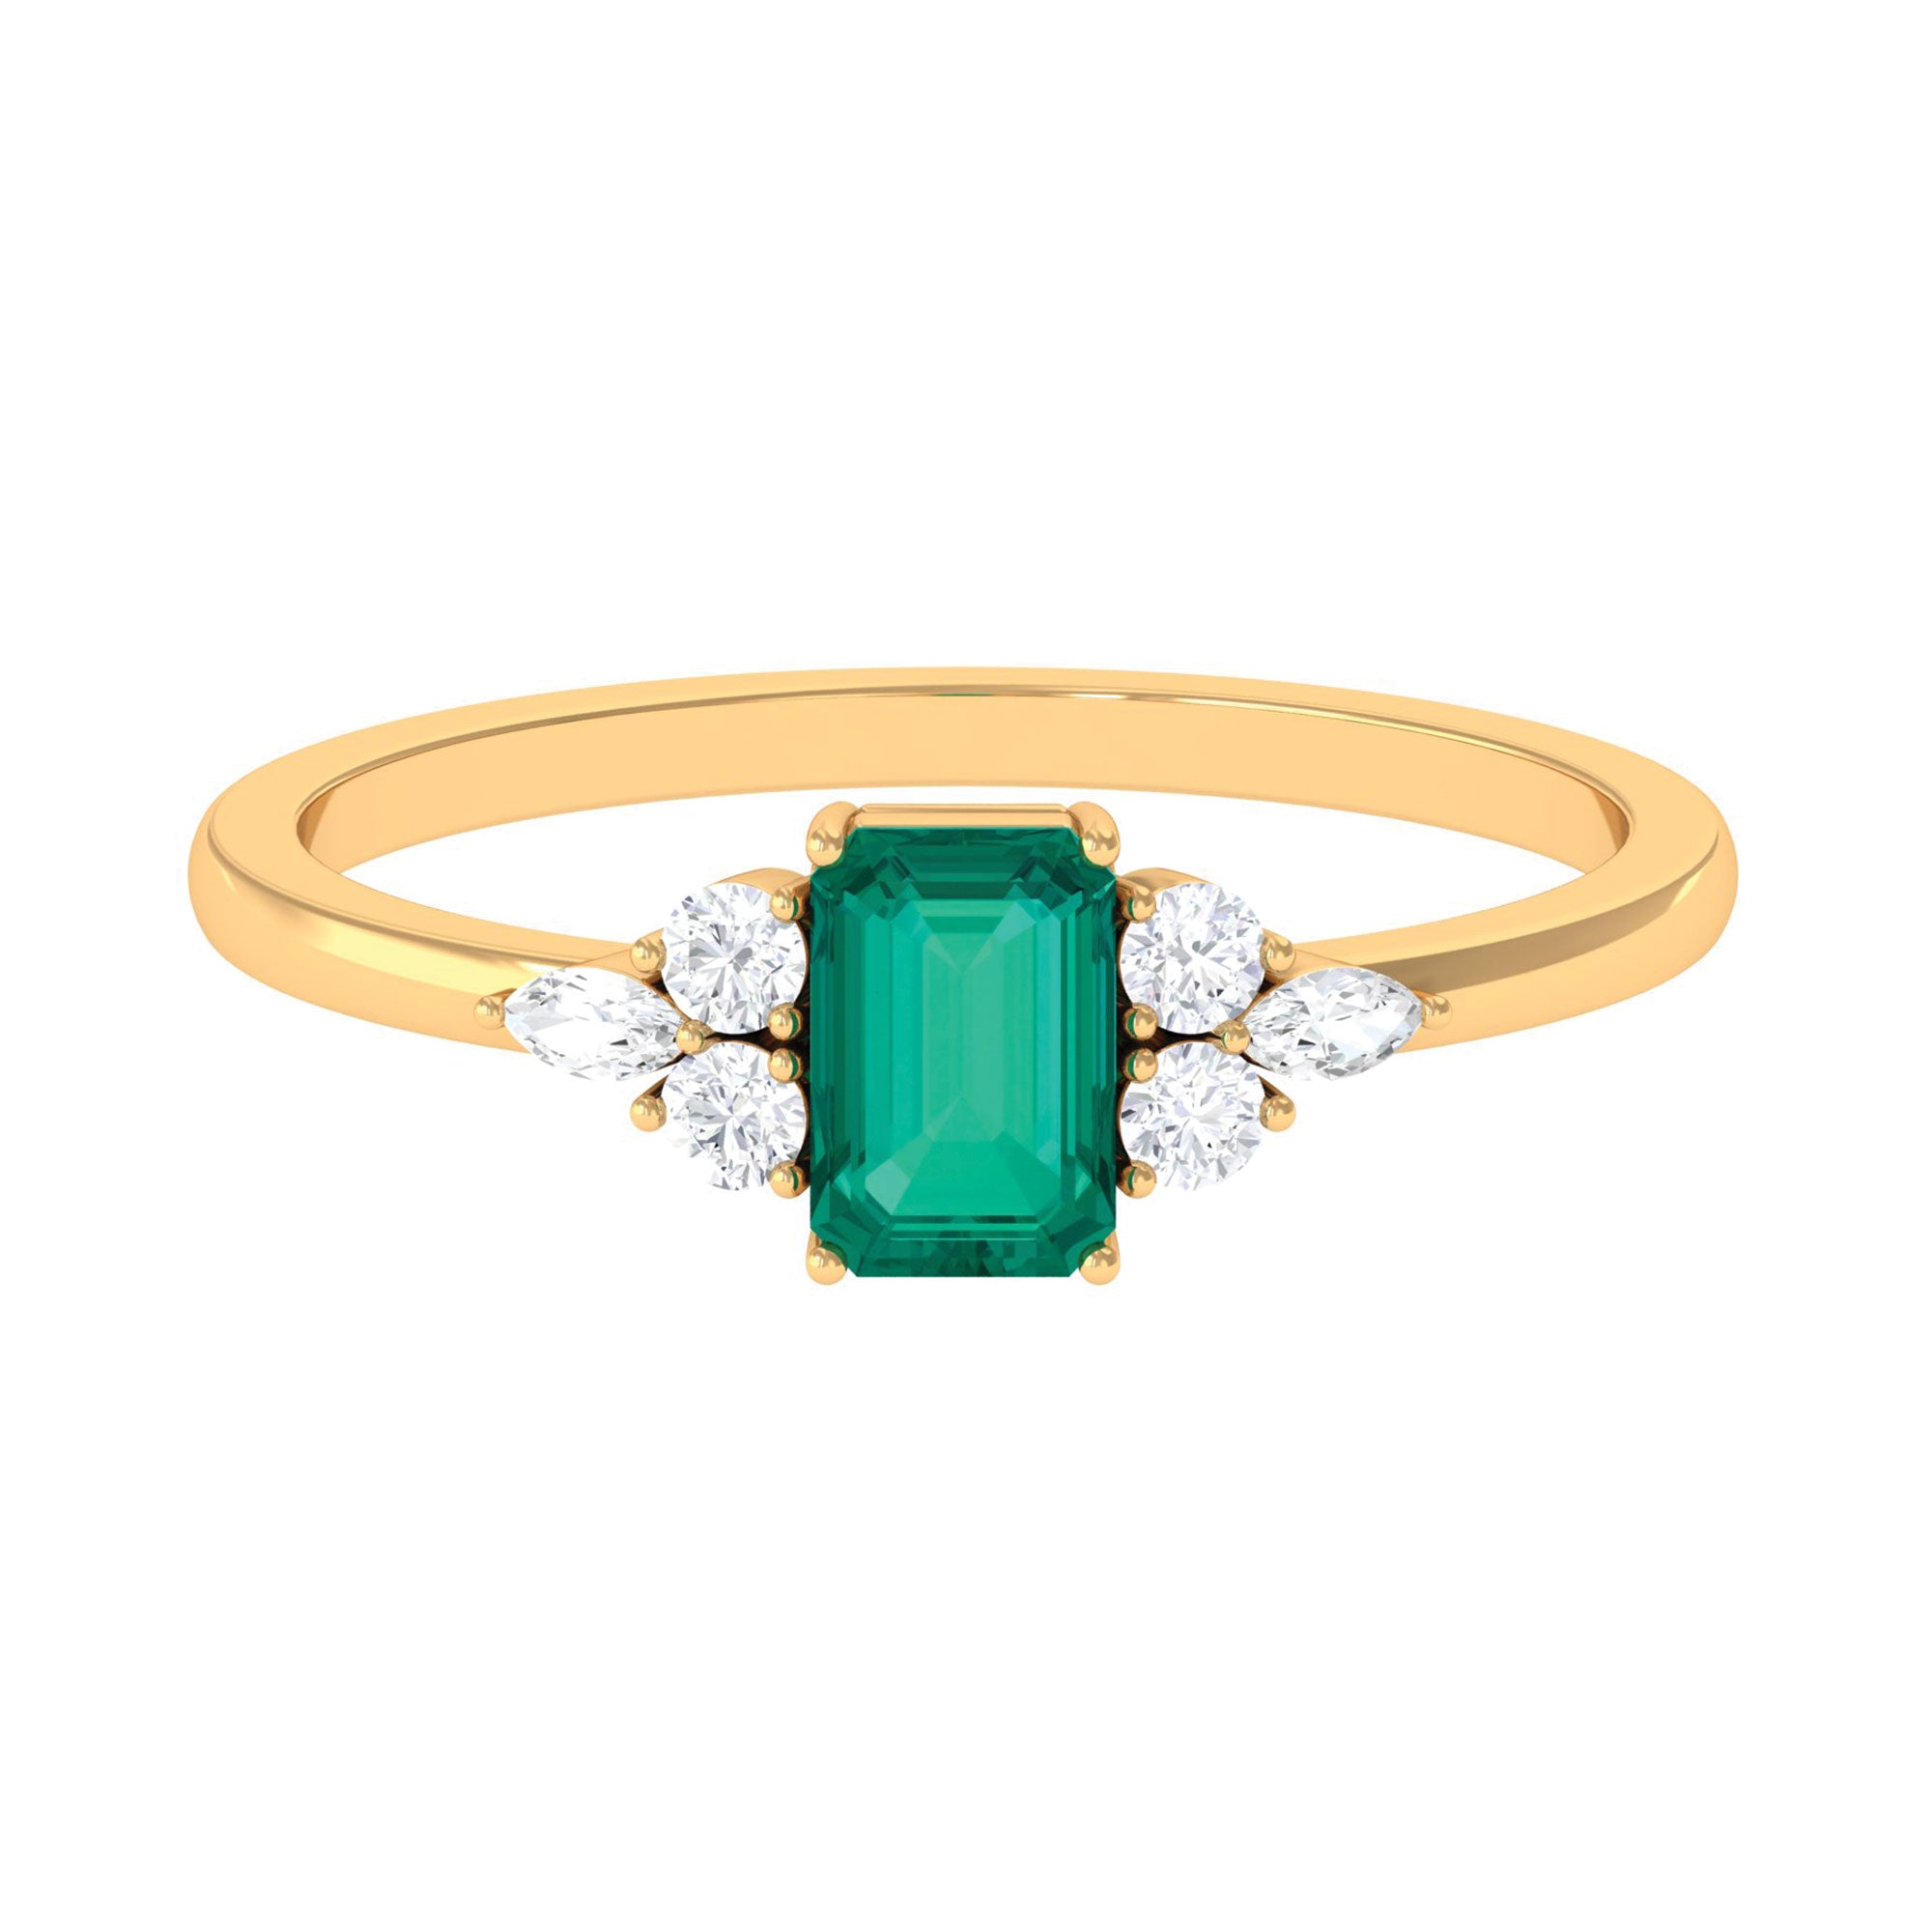 1 CT Octagon shape Solitaire Emerald Ring with Diamond Trio Emerald - ( AAA ) - Quality - Rosec Jewels